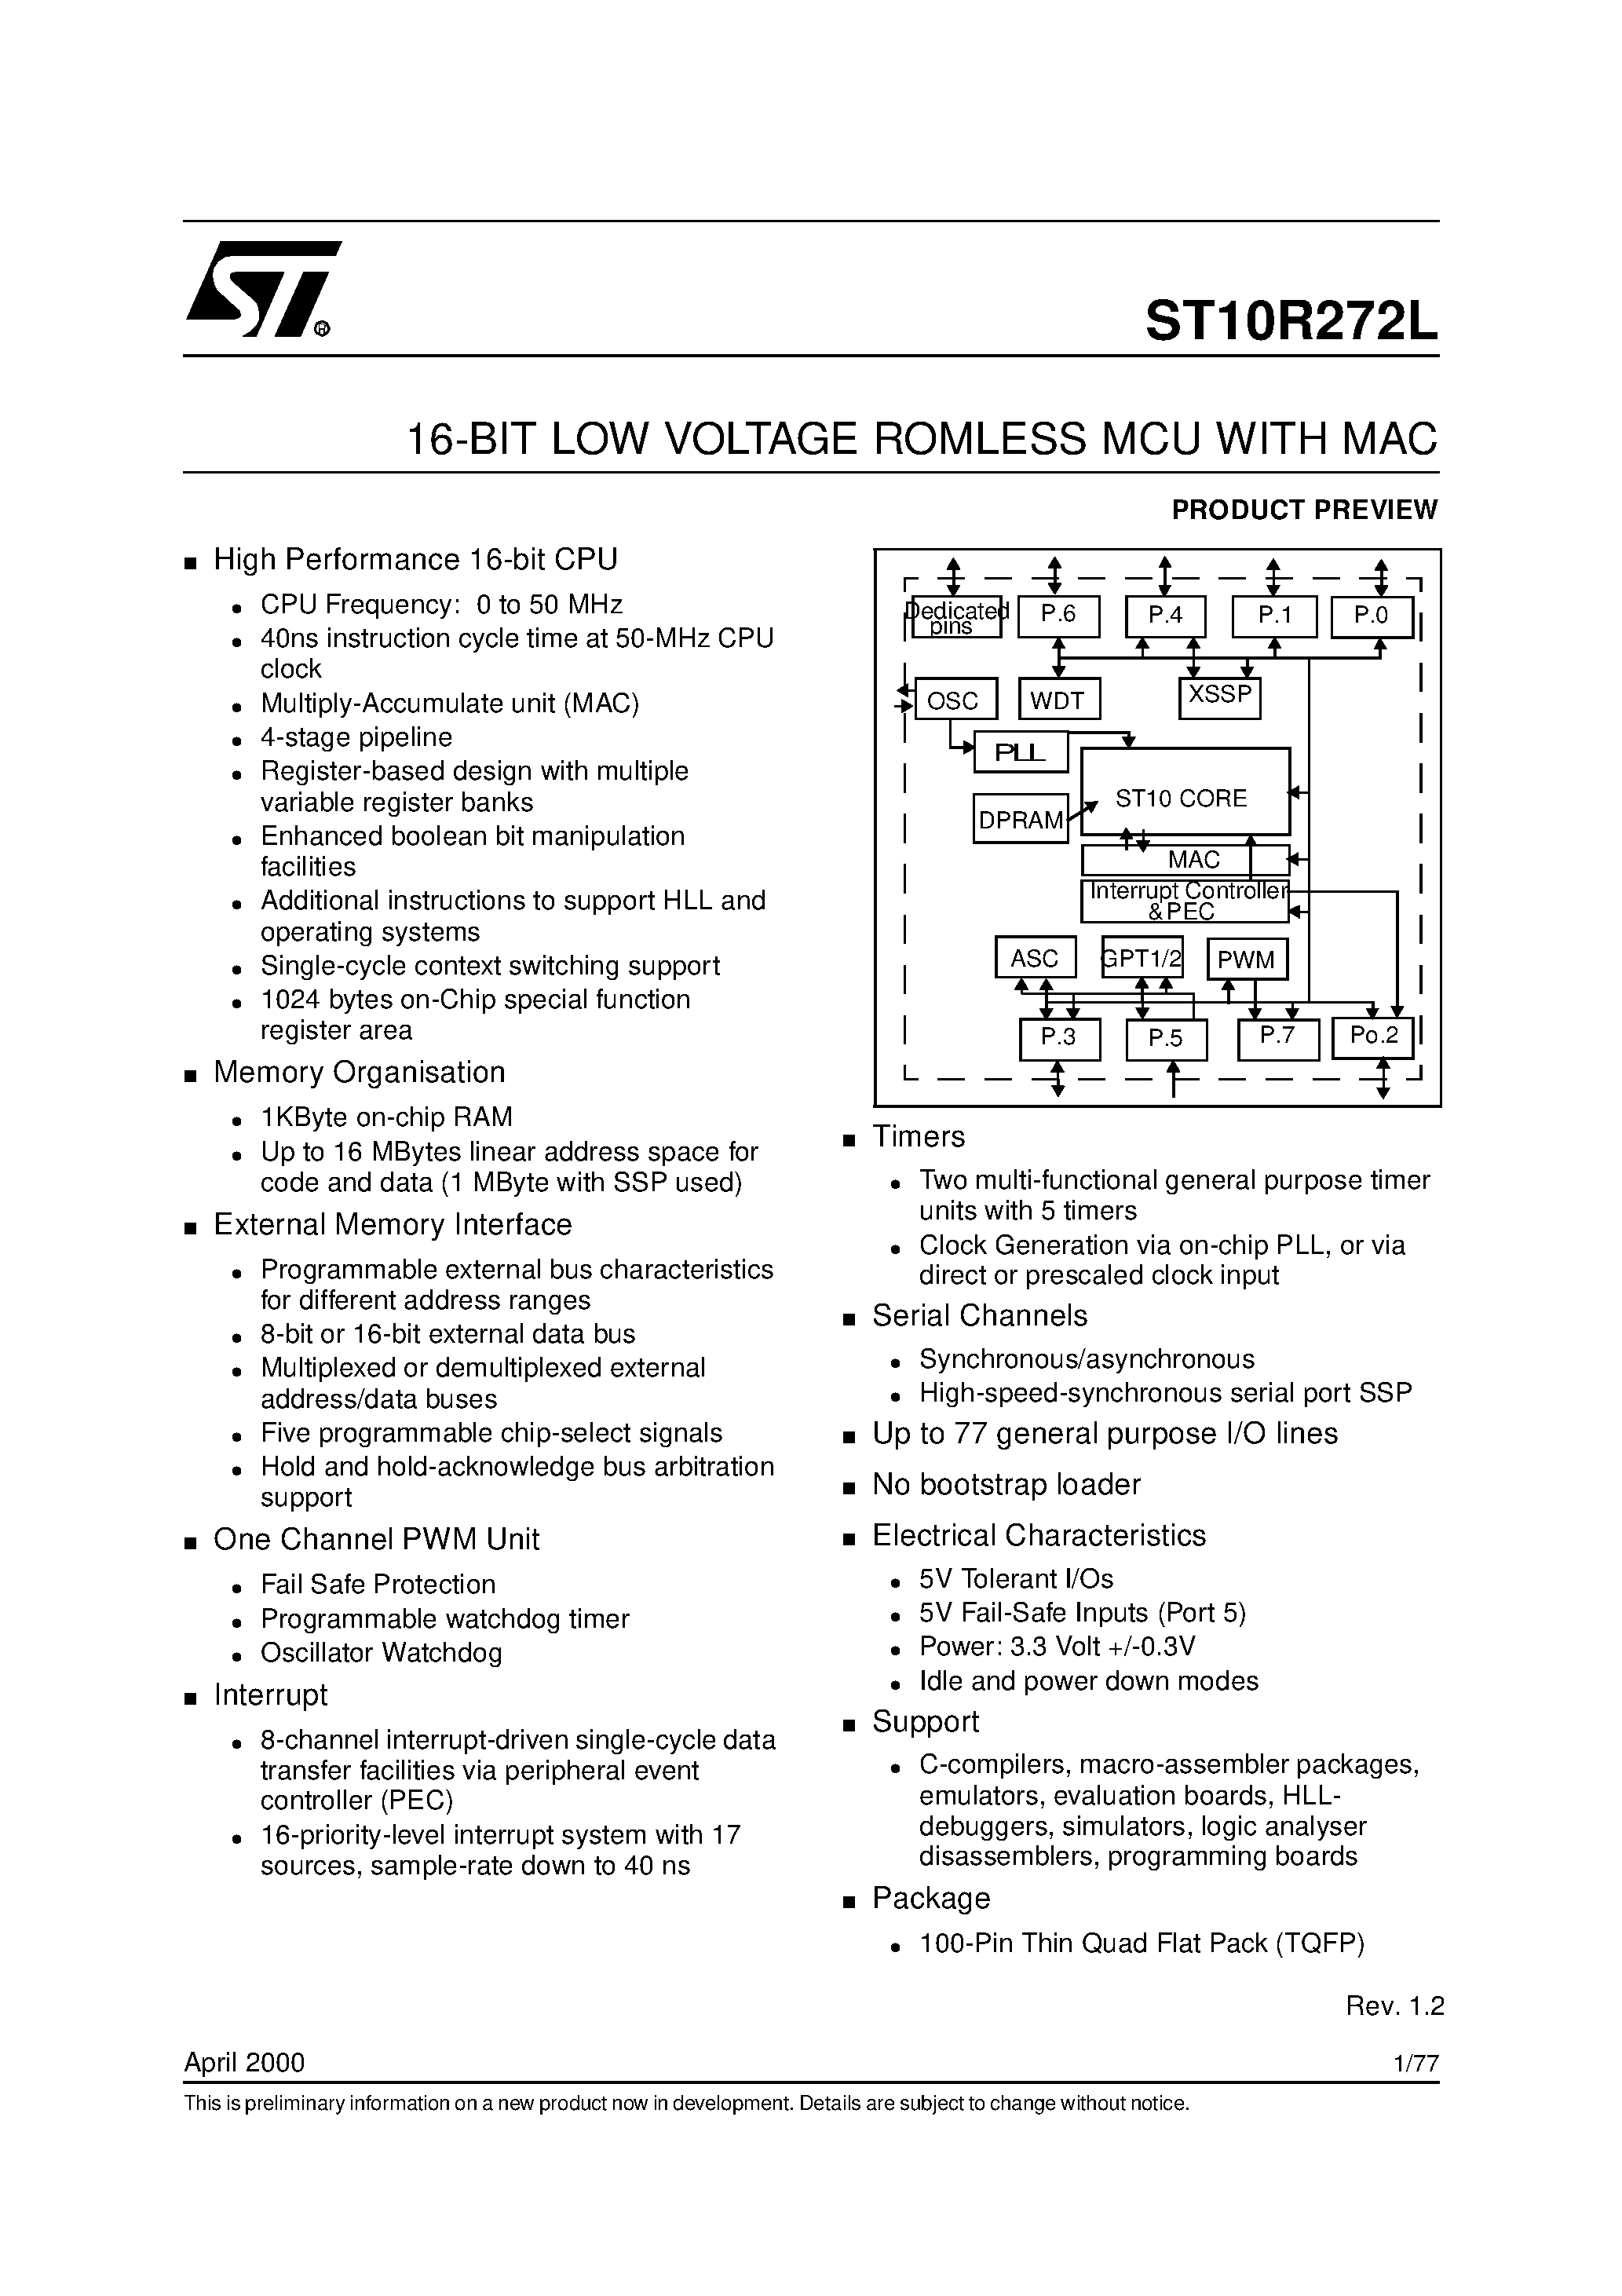 Datasheet ST10R272L - 16-BIT LOW VOLTAGE ROMLESS MCU WITH MAC page 1